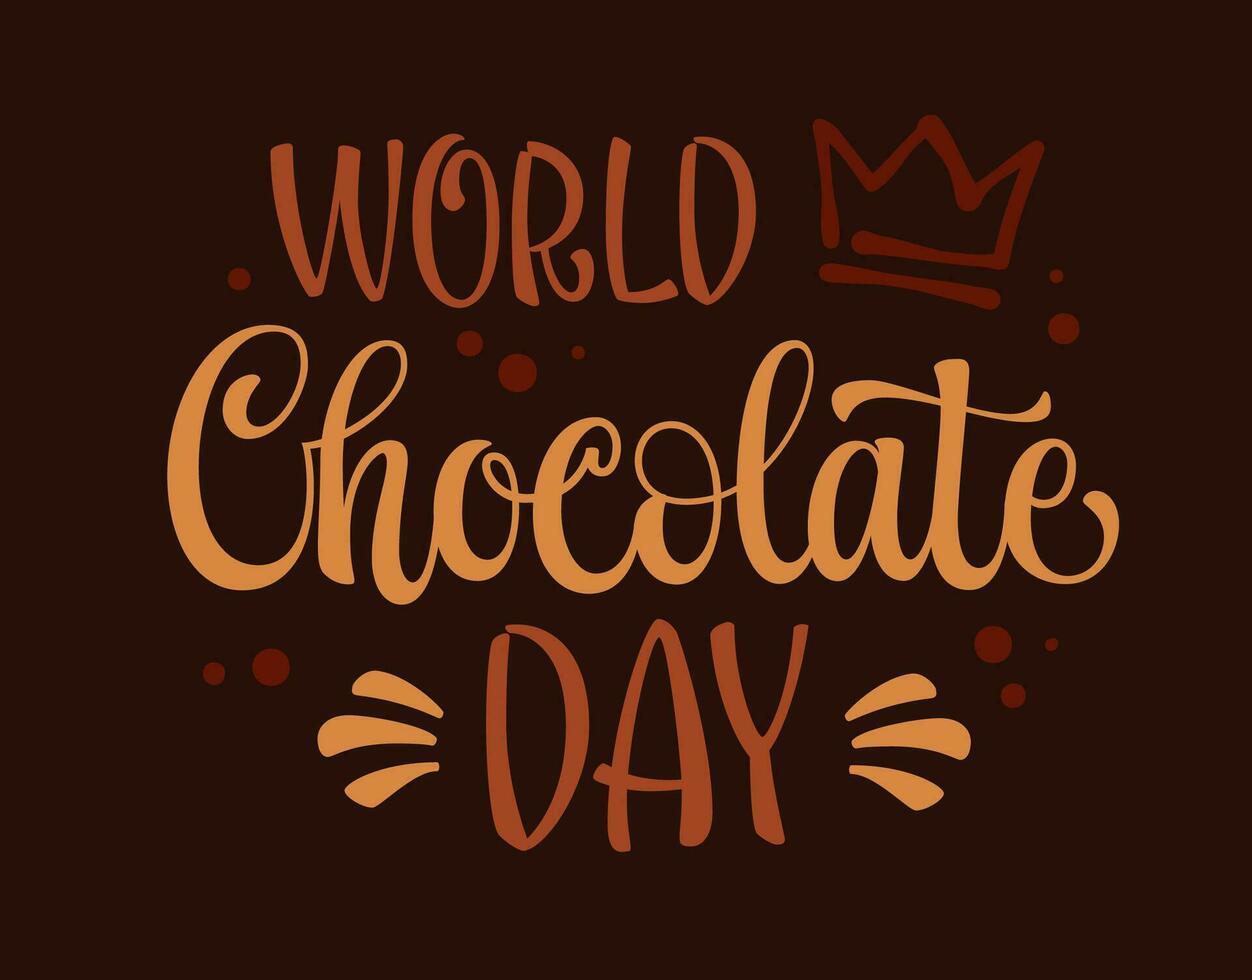 World chocolate day, hand drawn calligraphy style lettering design element. Sweets and chocolate theme vector design on dark chocolate background. Isolated typography illustration for any purposes